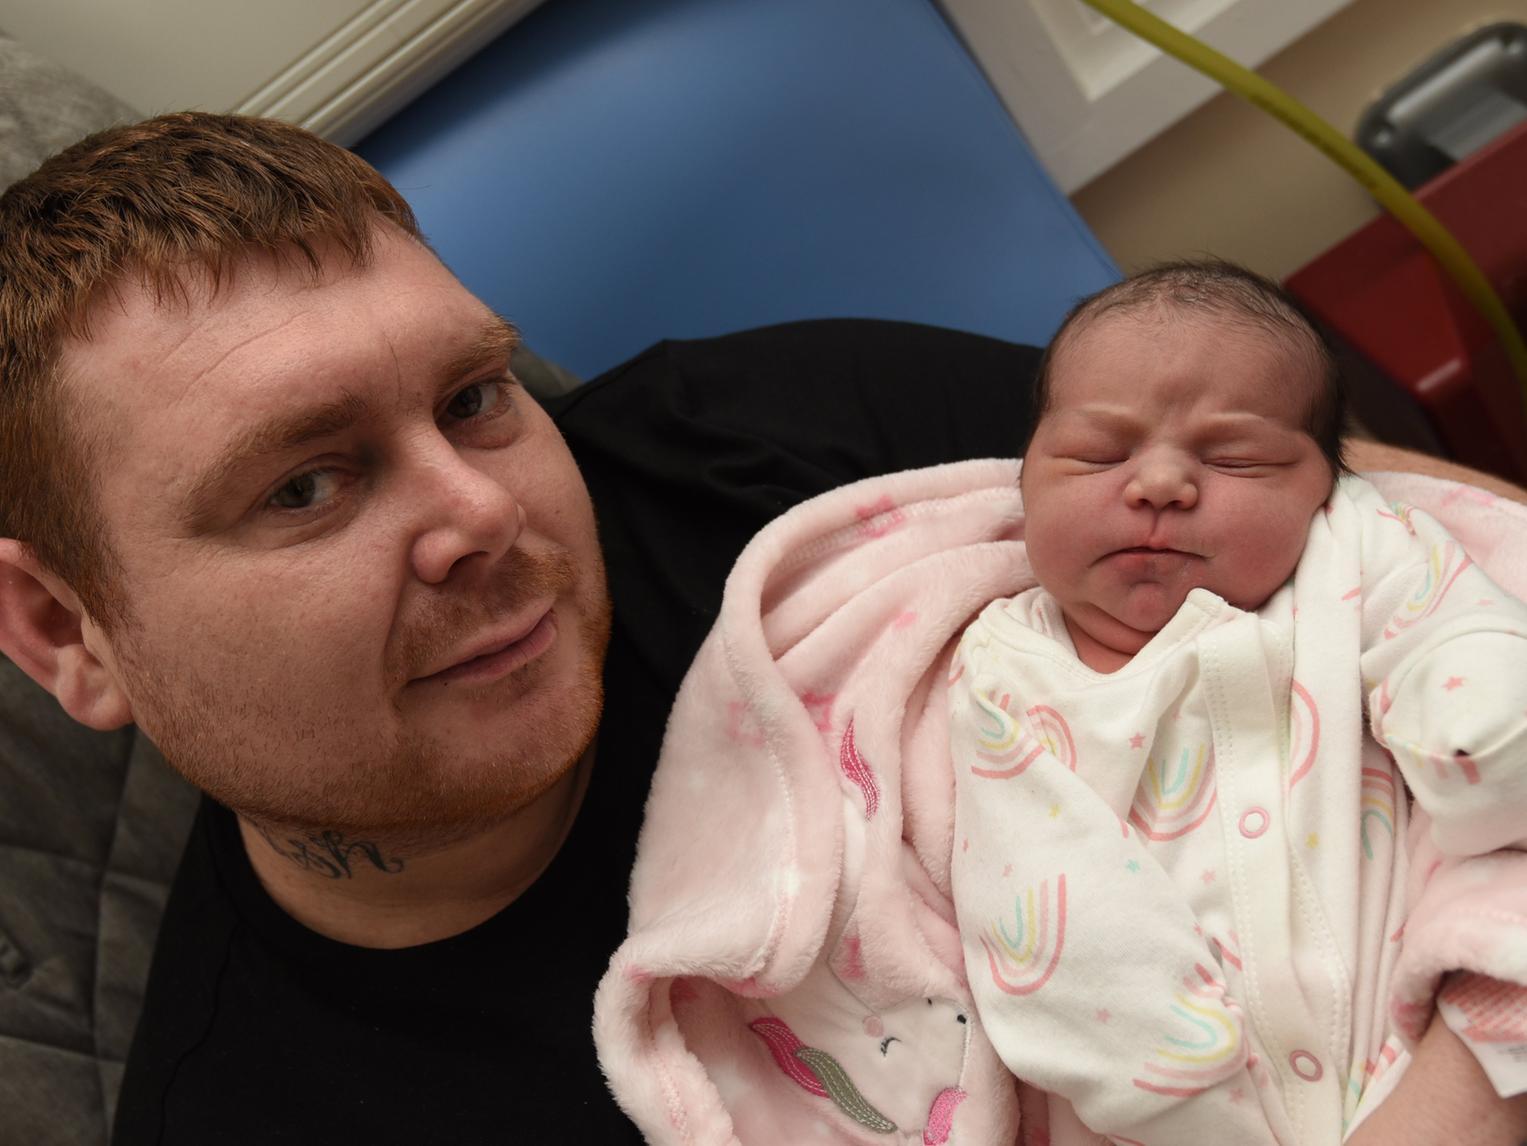 Baby Darcie Mai was born at Royal Preston Hospital on November 10 at 7.53pm, weighing 8lb 5oz, to parents Natasha Lowe and Phillip Thiem, pictured, from Chorley